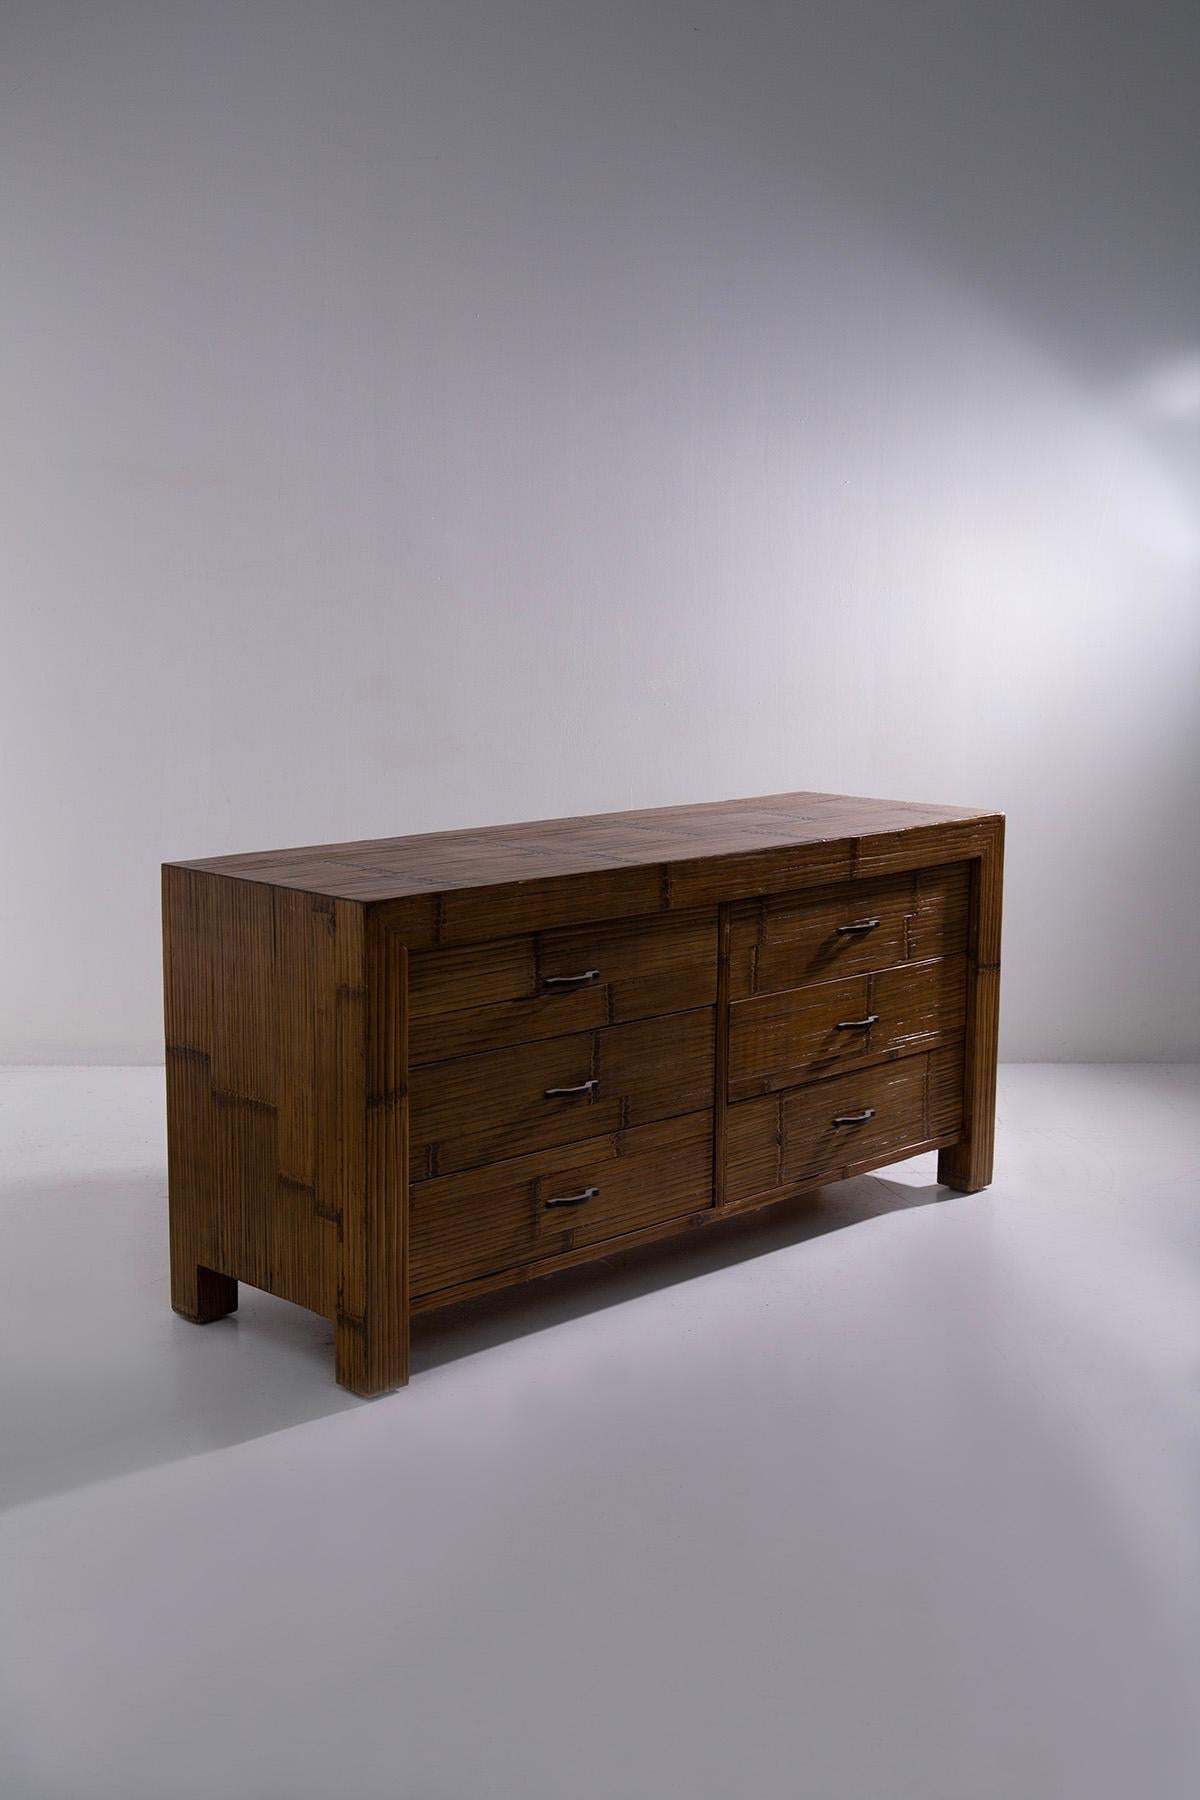 The eccentric Italian post-modern sideboard from the late 1980s to early 1990s is a striking blend of bold design and natural elements. Upholstered entirely in bamboo canes, it exudes a unique charm that effortlessly combines natural chic with a